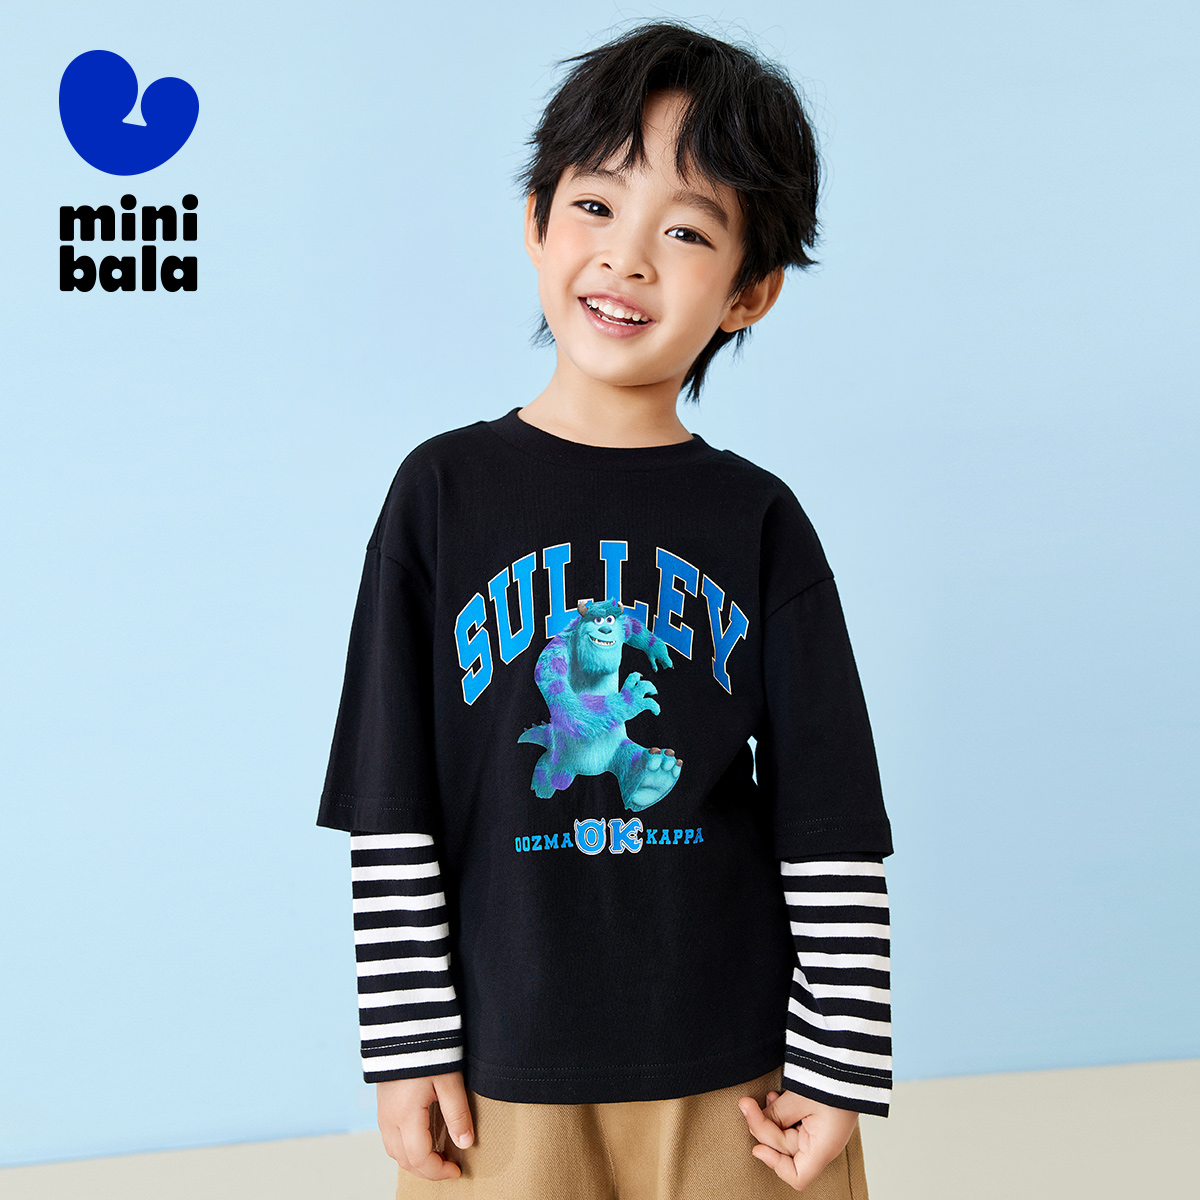 Tmall Uxian Mini Barabara Children's Autumn Long Sleeve T-shirt Male and Female Baby Fake Two Piece Pure Cotton Top